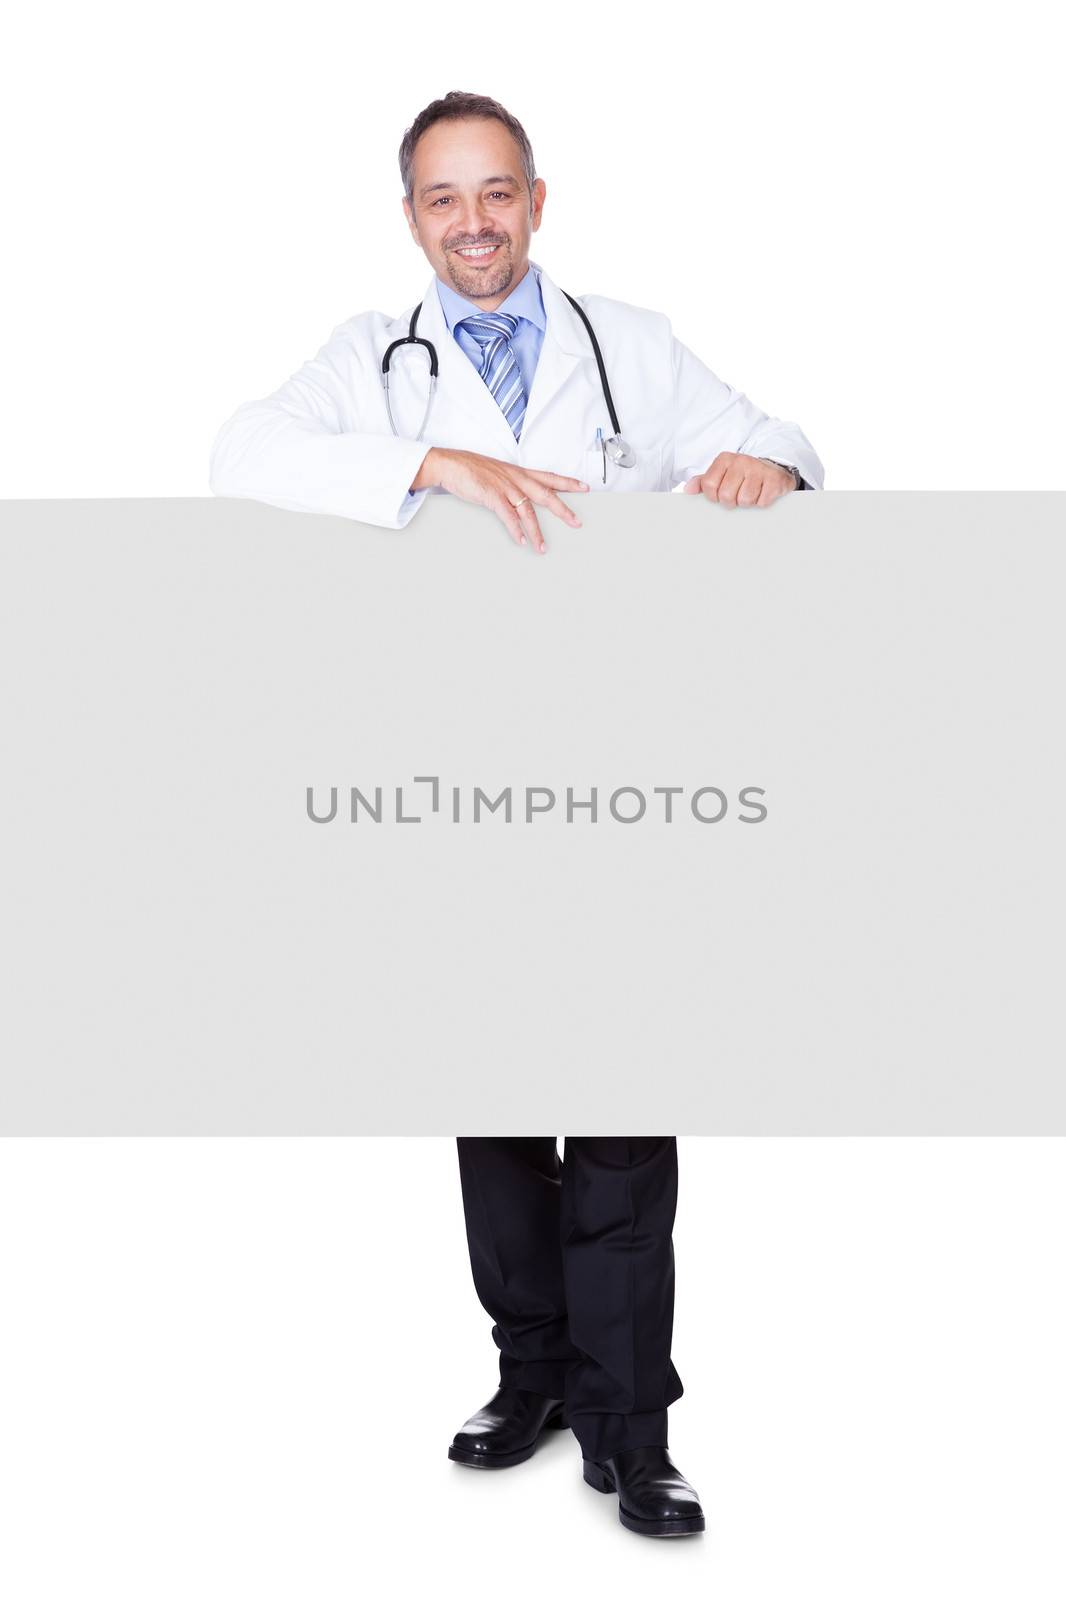 Portrait Of A Doctor Holding Blank Placard Isolated On White Background